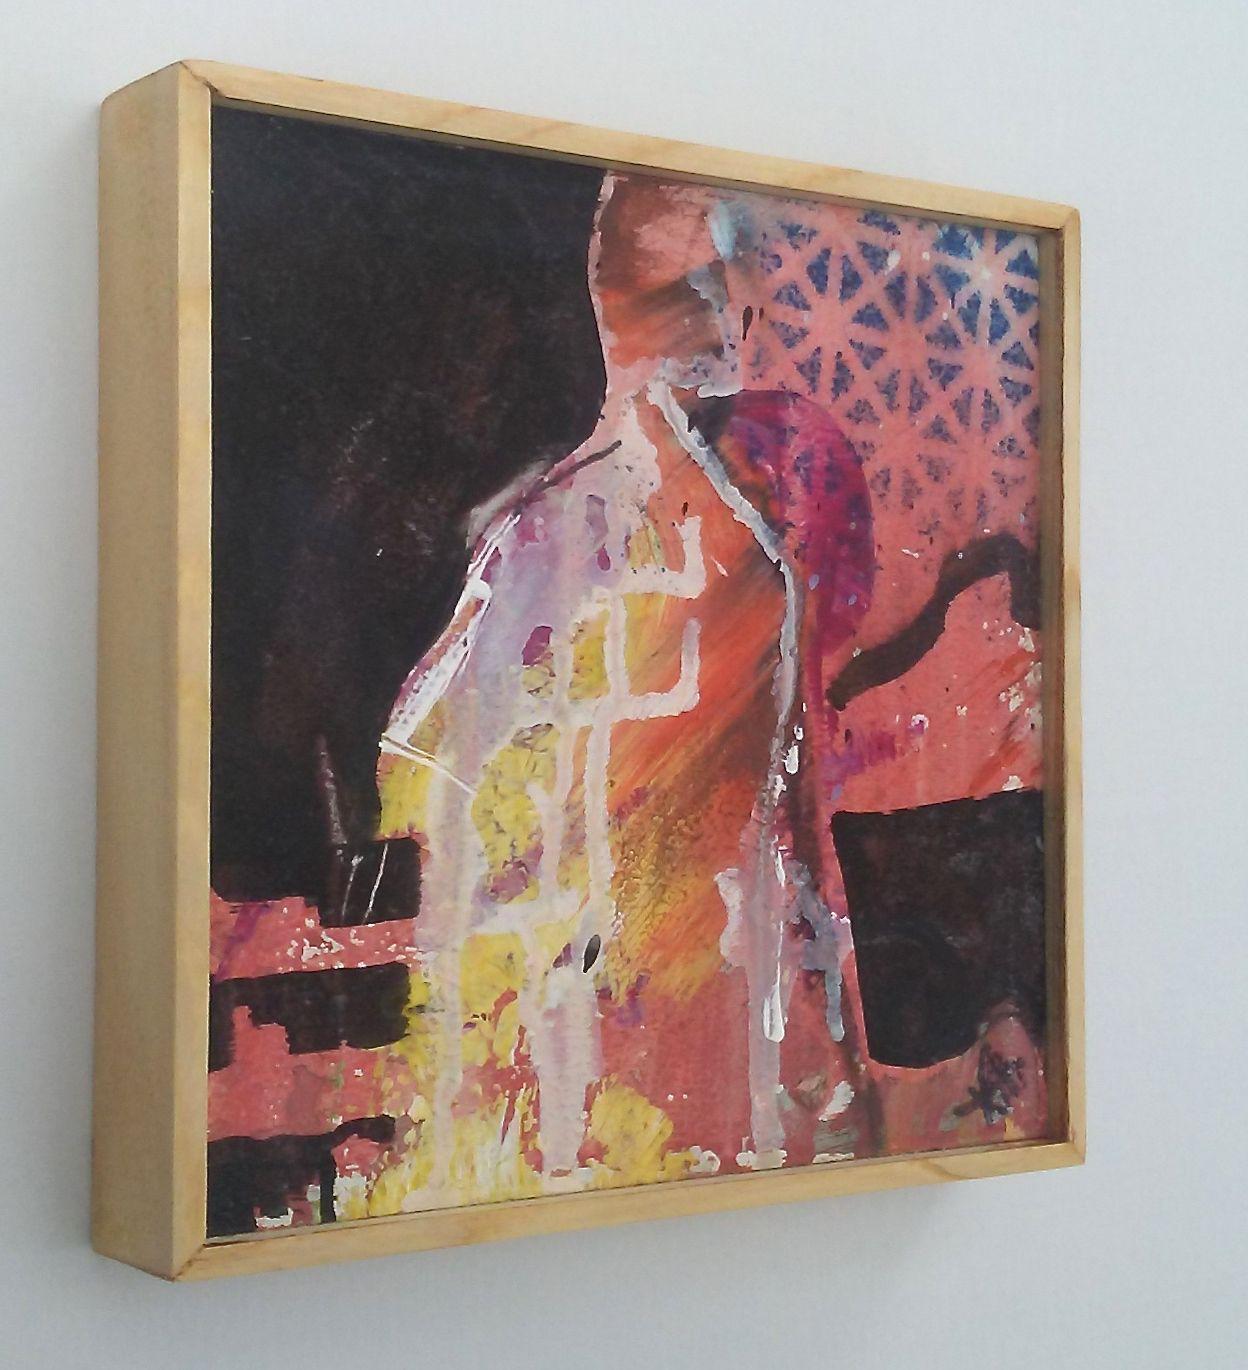 Continuing to explore the smaller figurative painting series. Holding the work during the process changes the experience a lot, as does the brevity I've enjoyed in these paintings. With wood lattice frame, overall size is 8.25